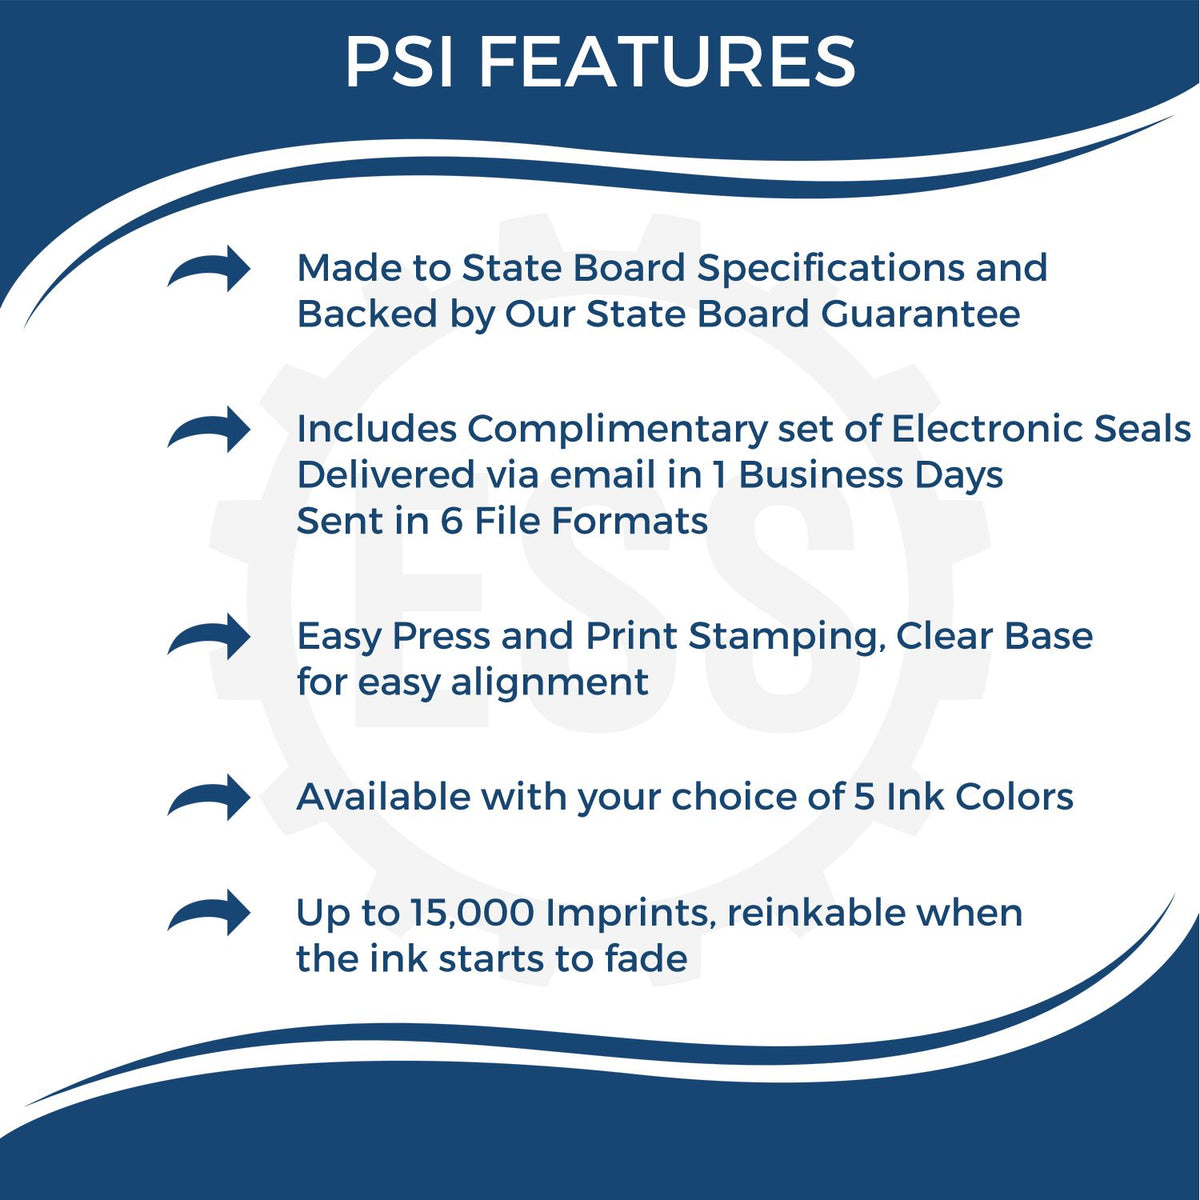 A picture of an infographic highlighting the selling points for the PSI Louisiana Notary Stamp